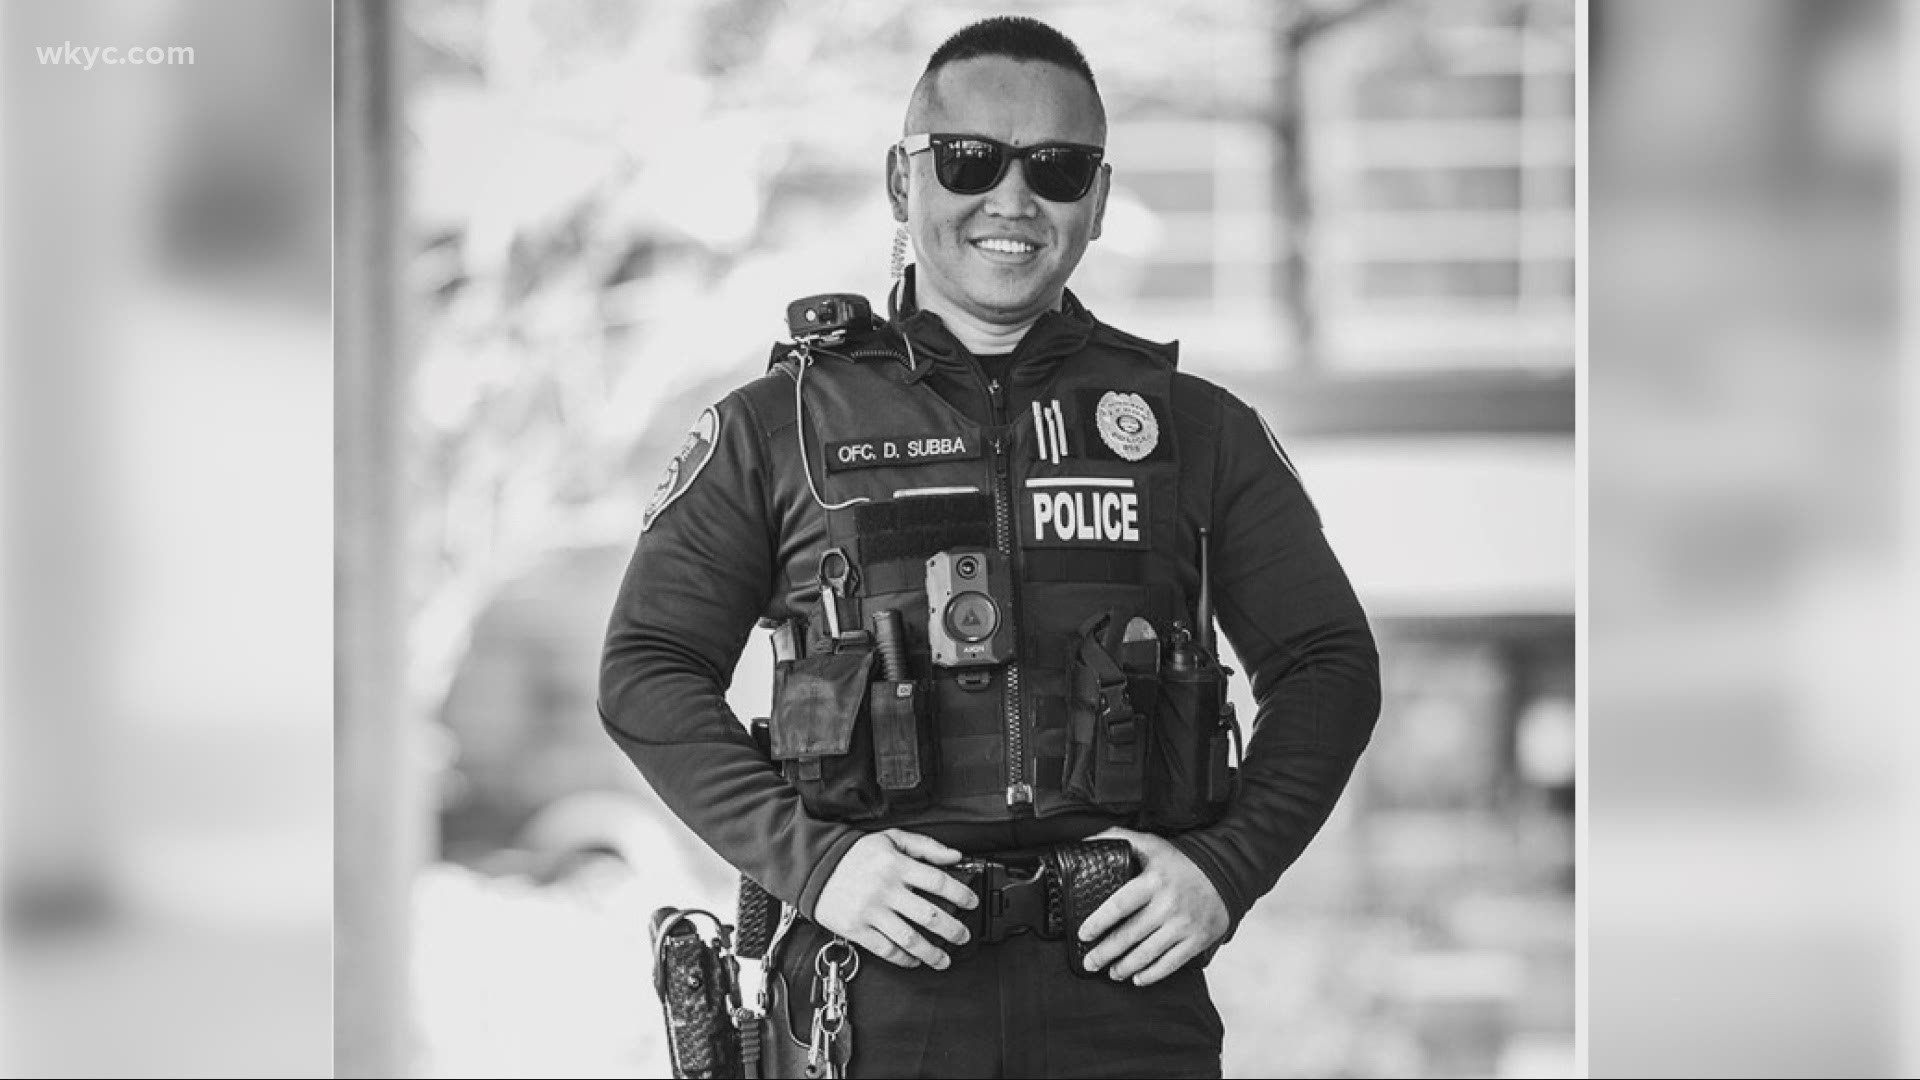 75 naturalization ceremonies will be held Sept. 18 as part of Global Cleveland's Welcoming Week. Akron officer Damber Subba recalled his story of becoming a citizen.